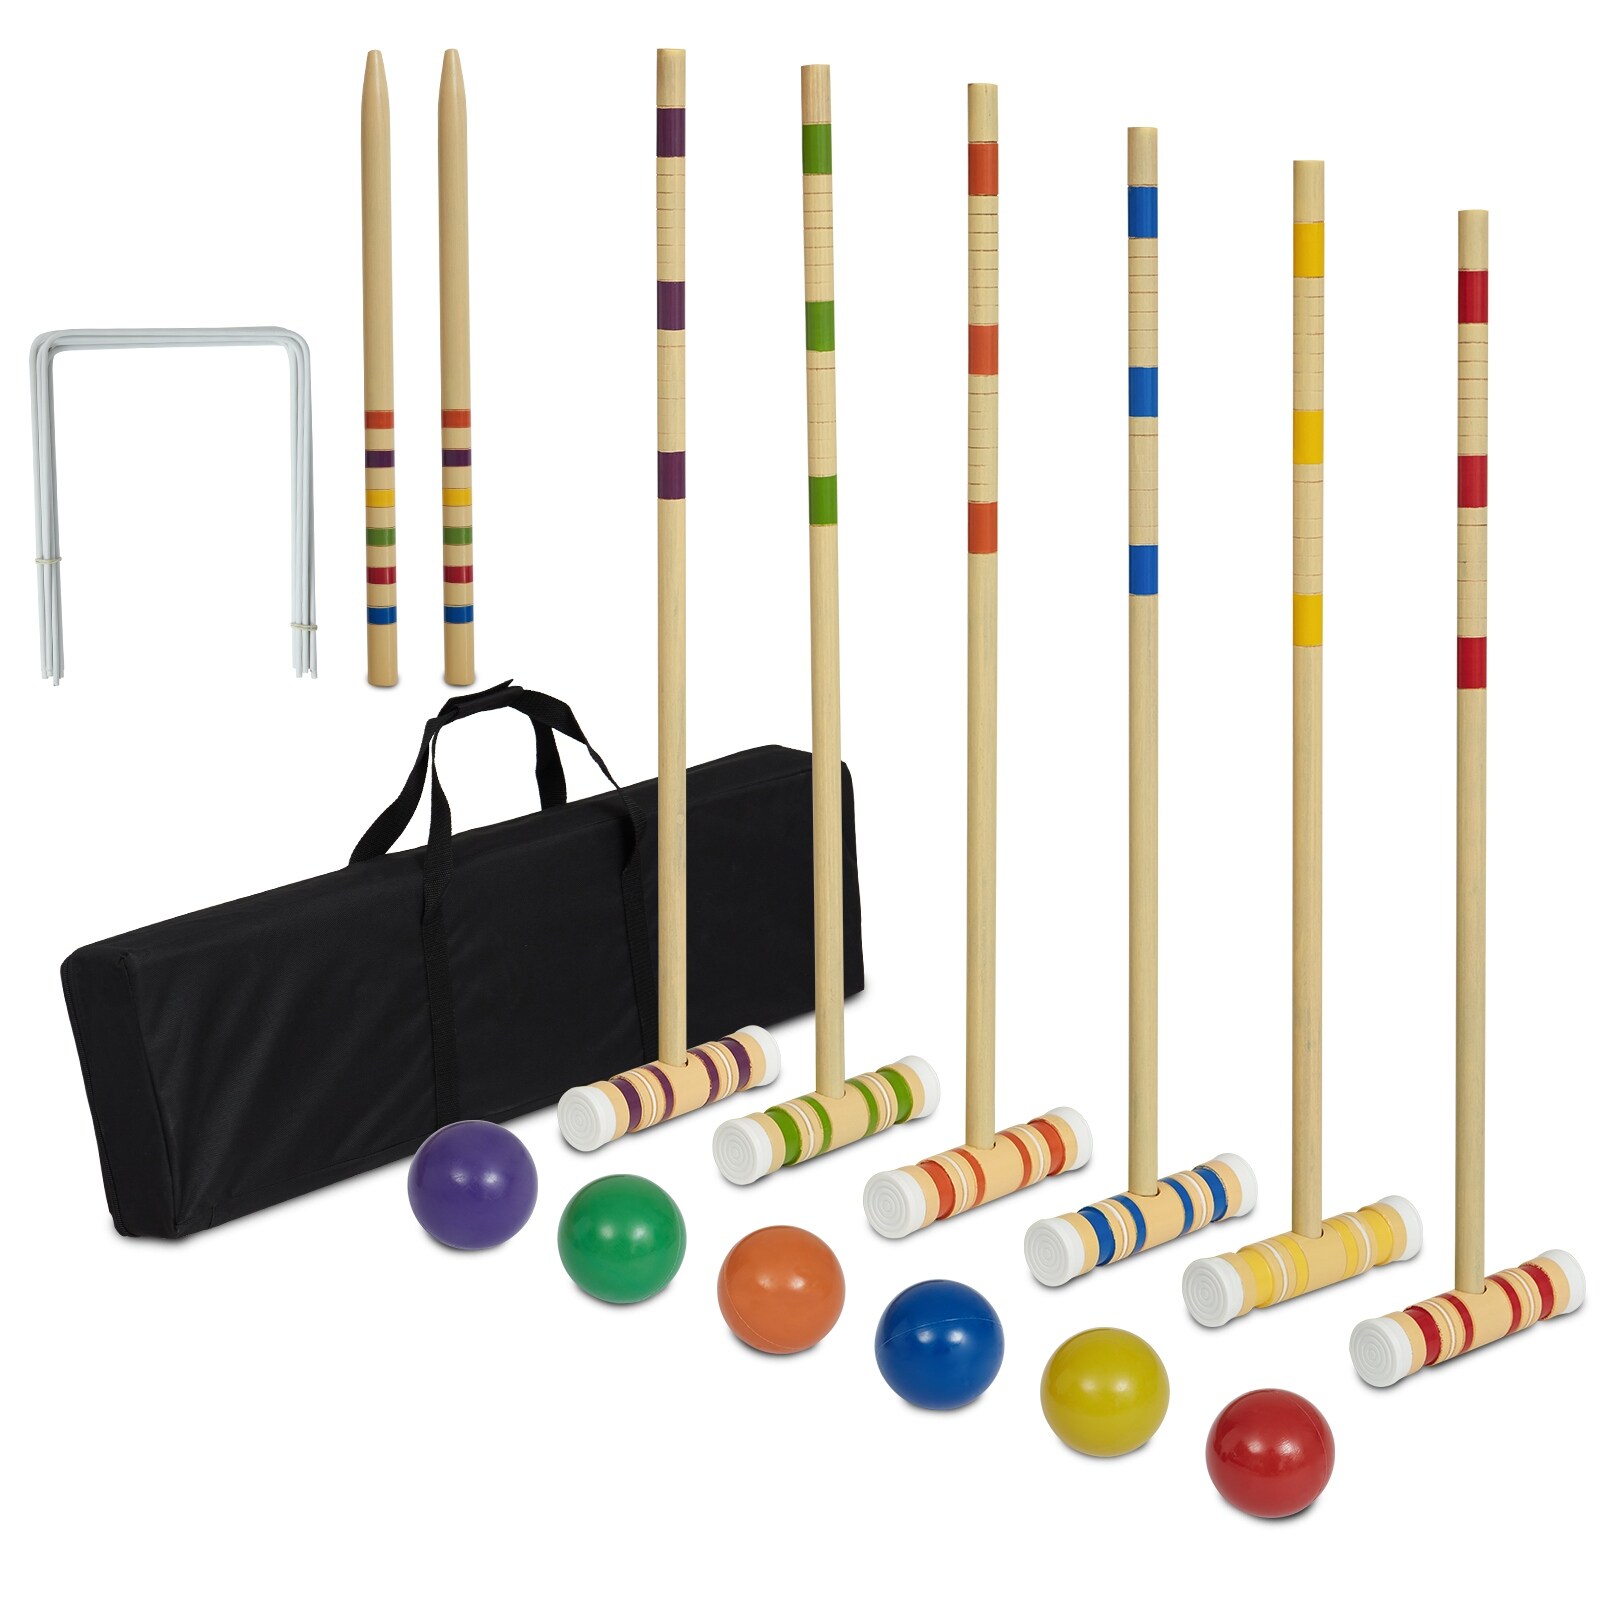 https://ak1.ostkcdn.com/images/products/is/images/direct/f90297b086a14cd3c494d87850f8fed1ced9f3c5/32inch-6-Player-Deluxe-Croquet-Set%2C-Wooden-Outdoor-Croquet-Set-with-Wooden-Mallets%2C-Carrying-Bag-for-Kids-or-Adults.jpg